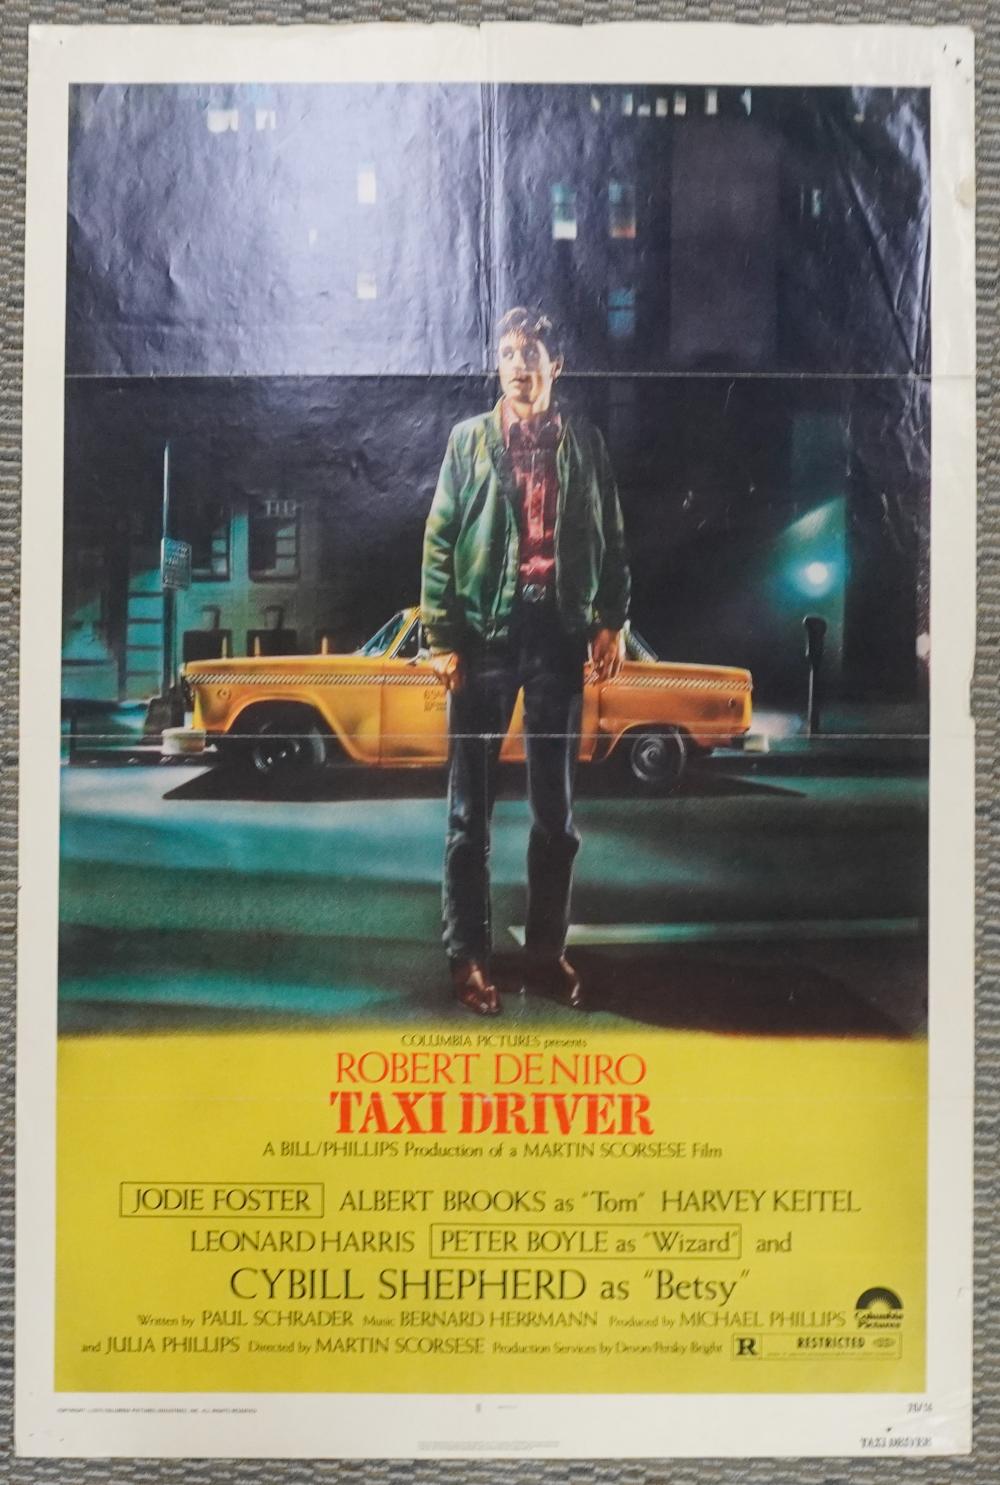 'TAXI DRIVER' THEATRICAL POSTER,